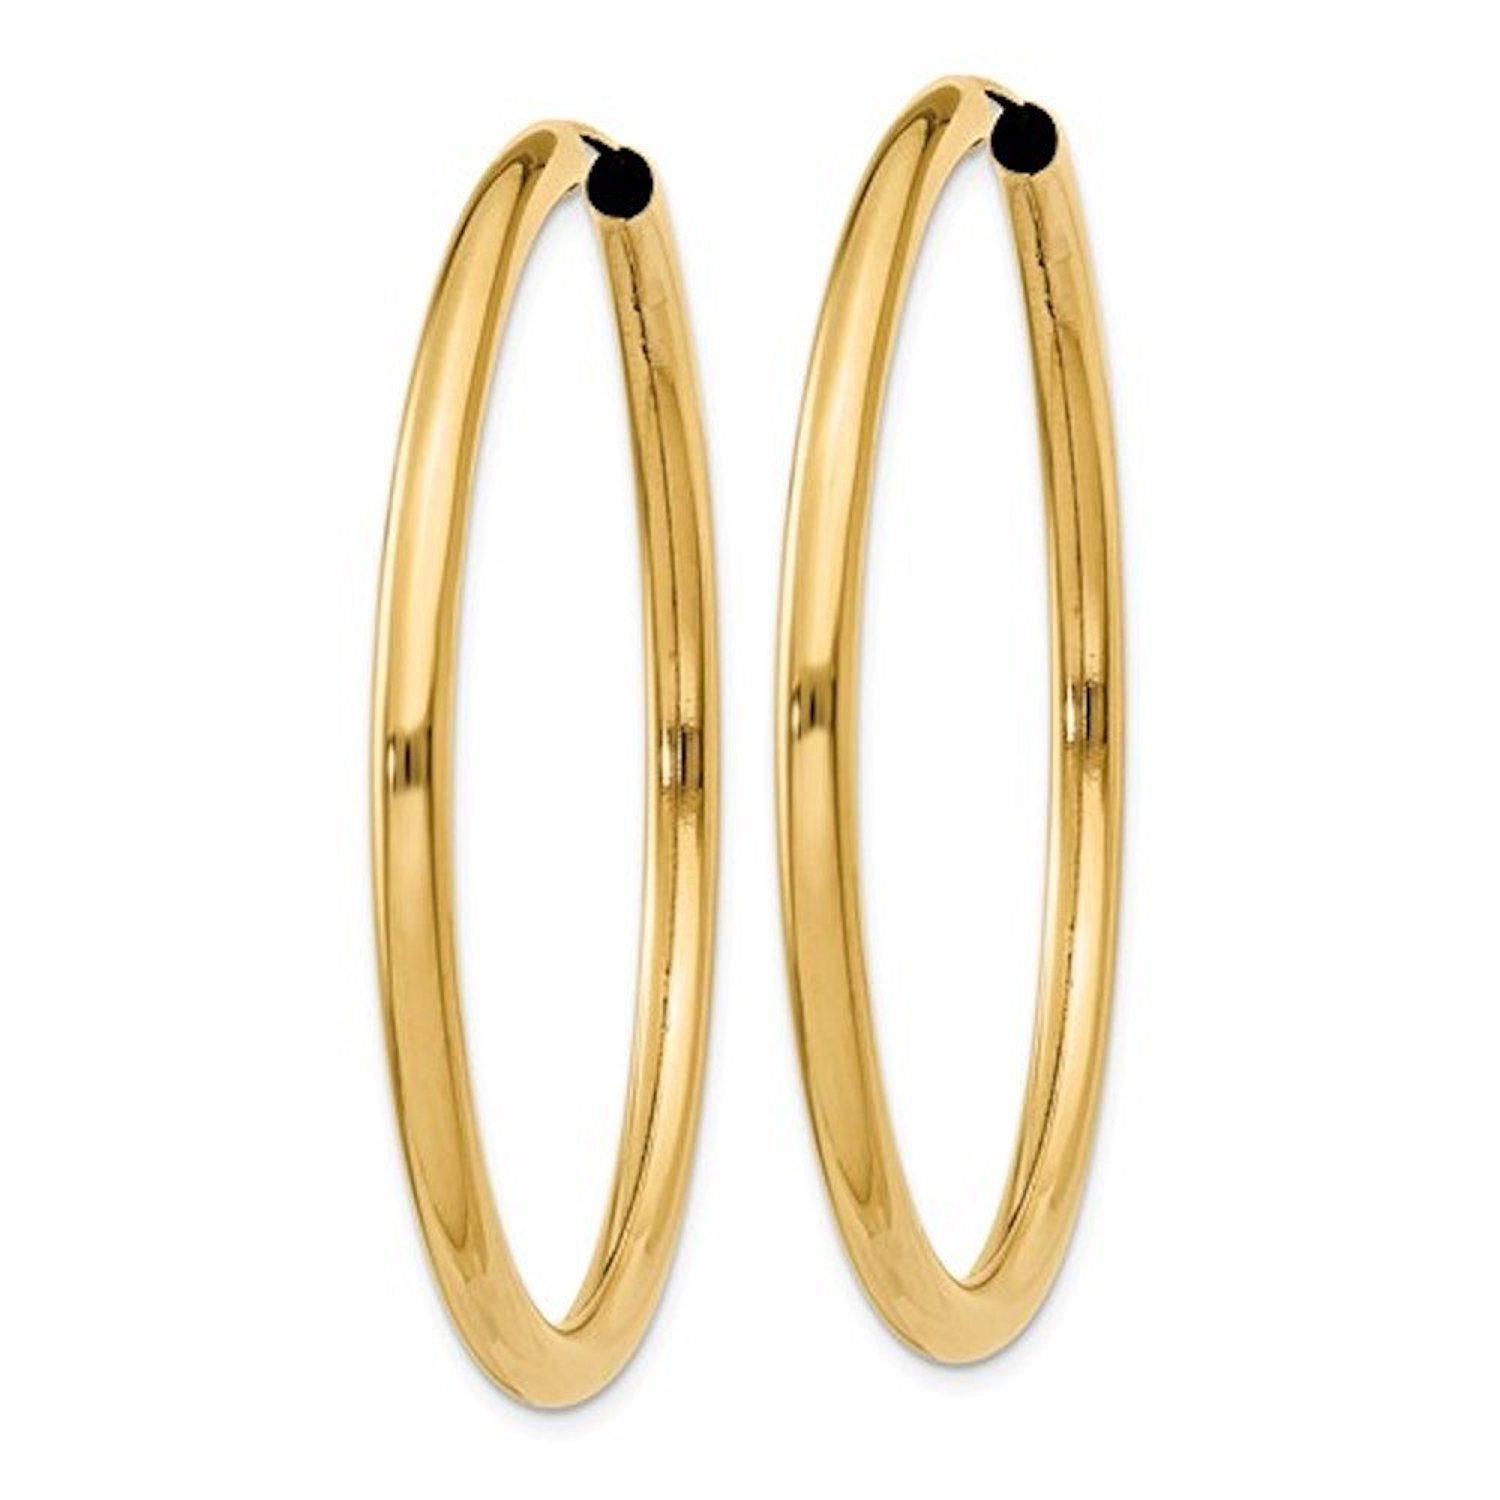 14k Yellow Gold Round Endless Hoop Earrings 45mm x 2.75mm